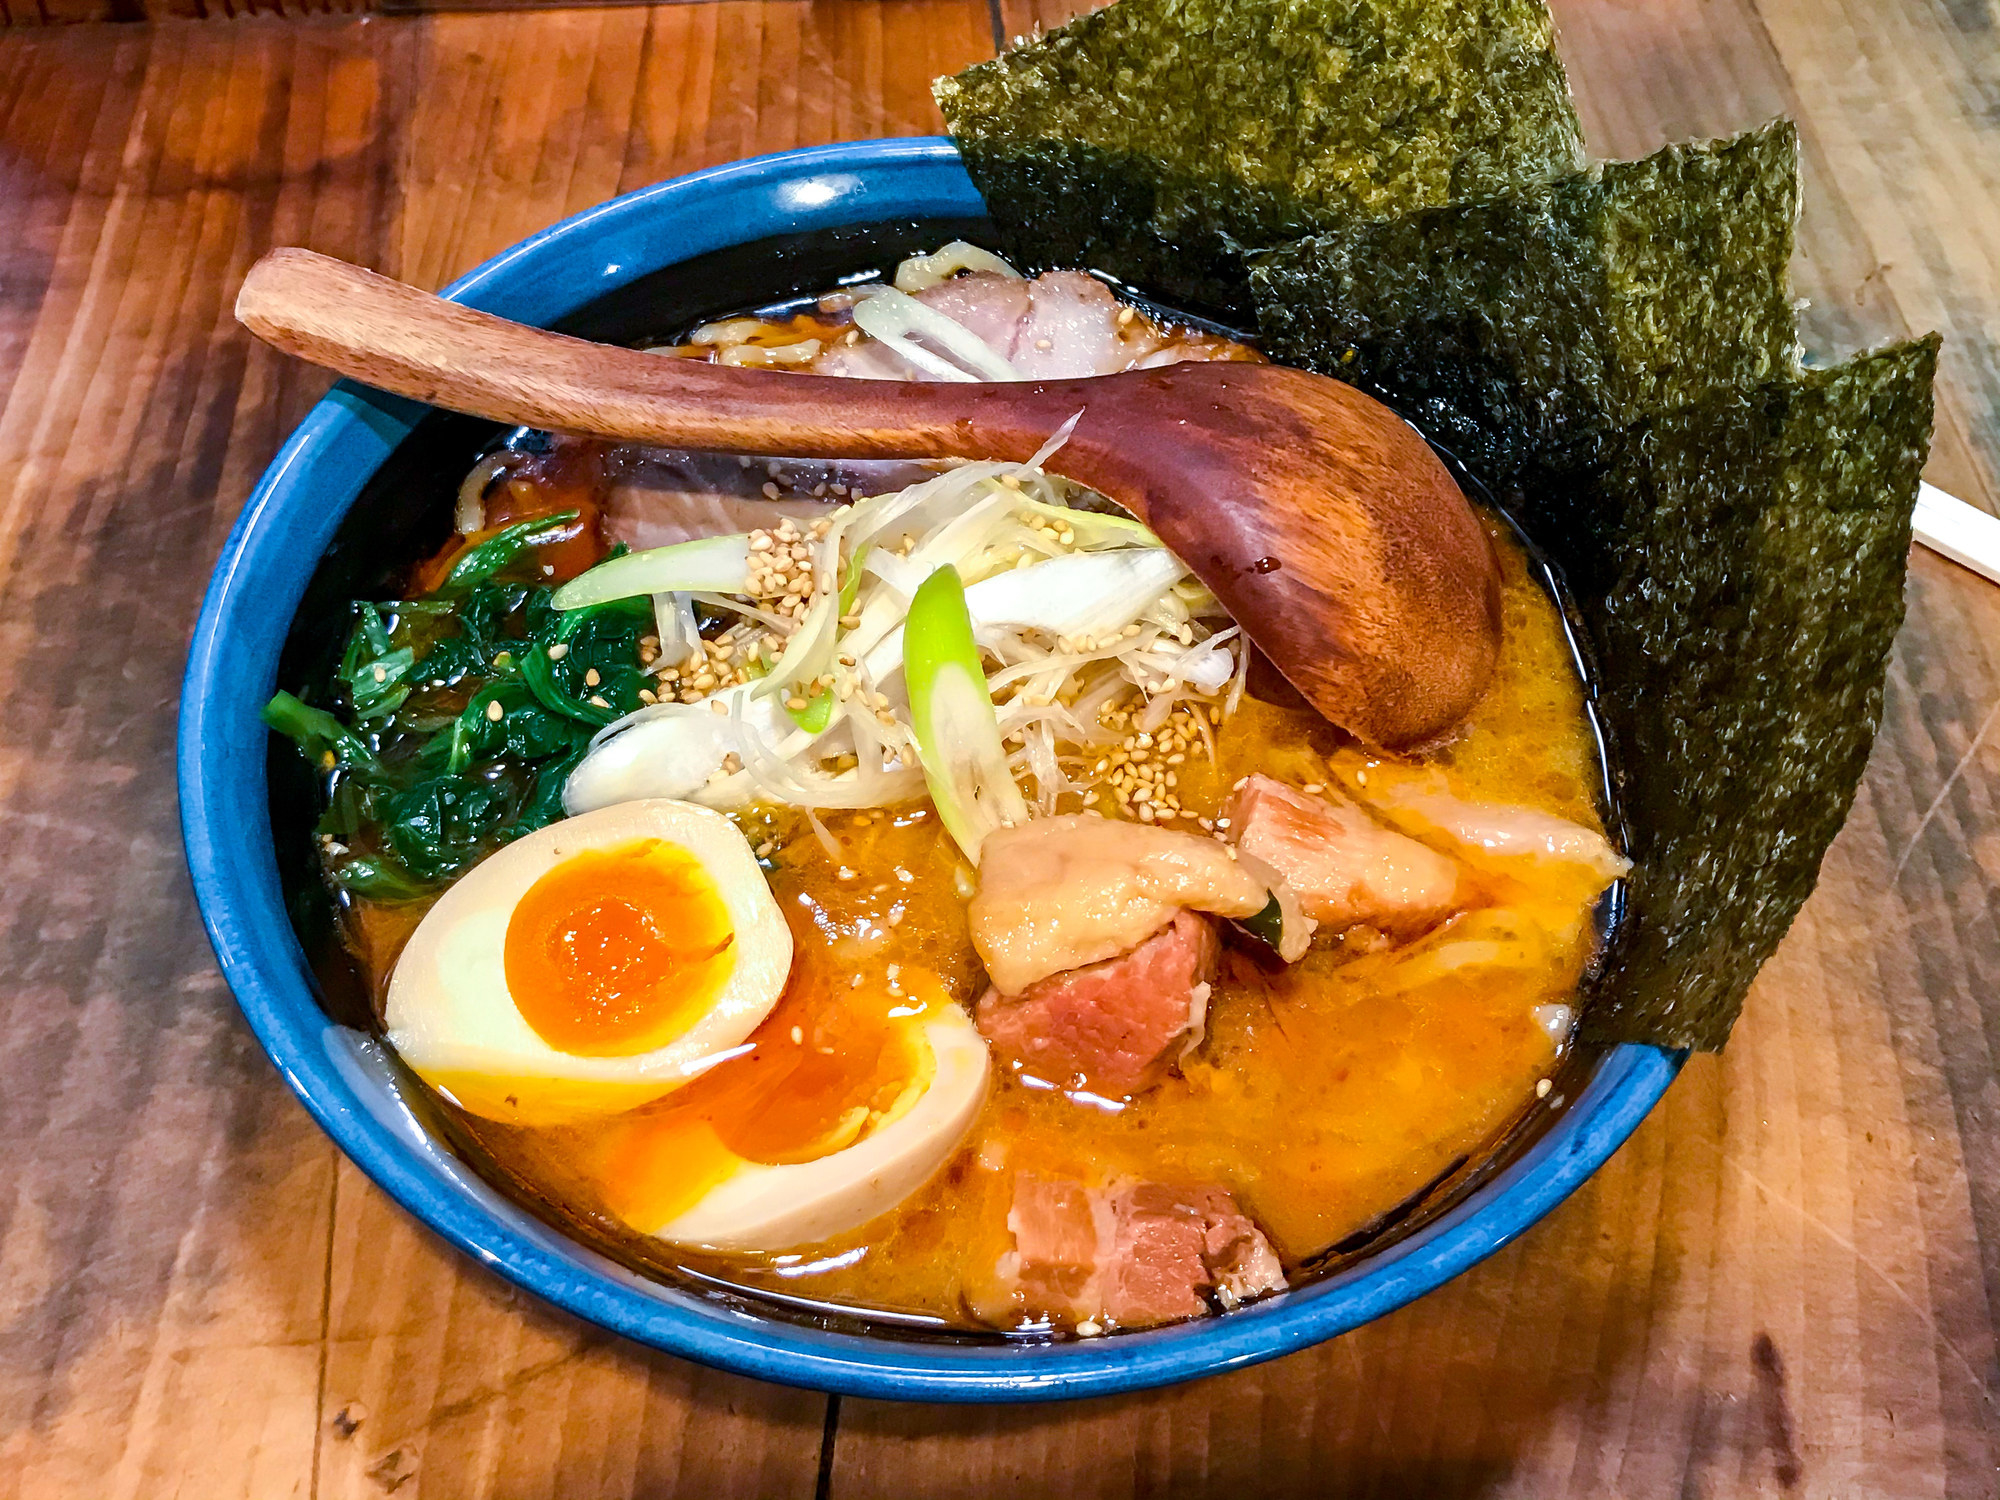 A bowl of ramen with a soft-boiled egg and seaweed